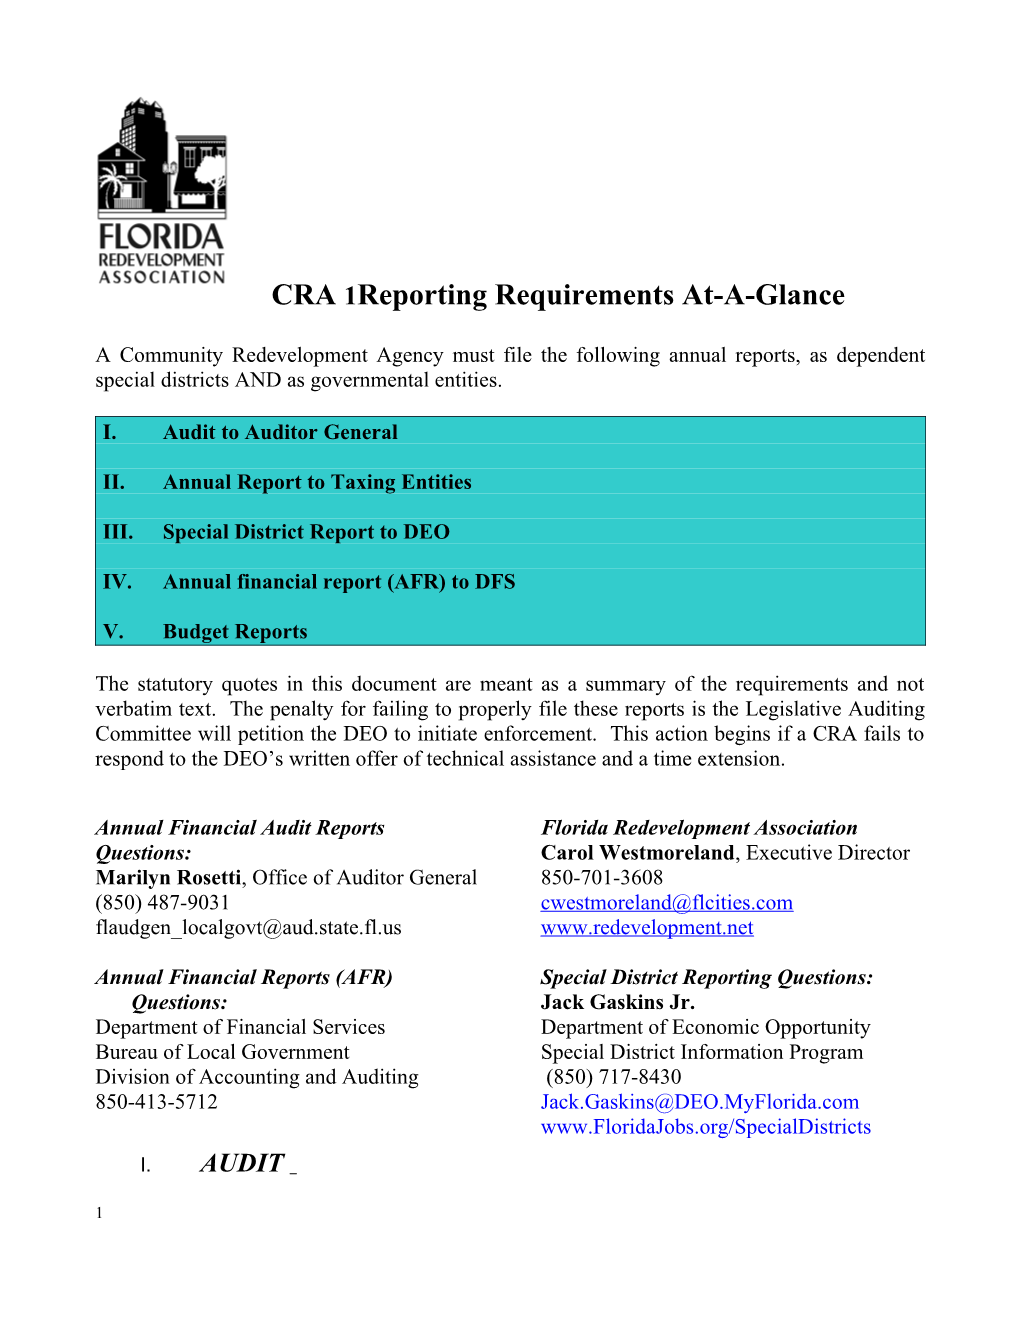 Appendix A: Reporting Requirements at a Glance